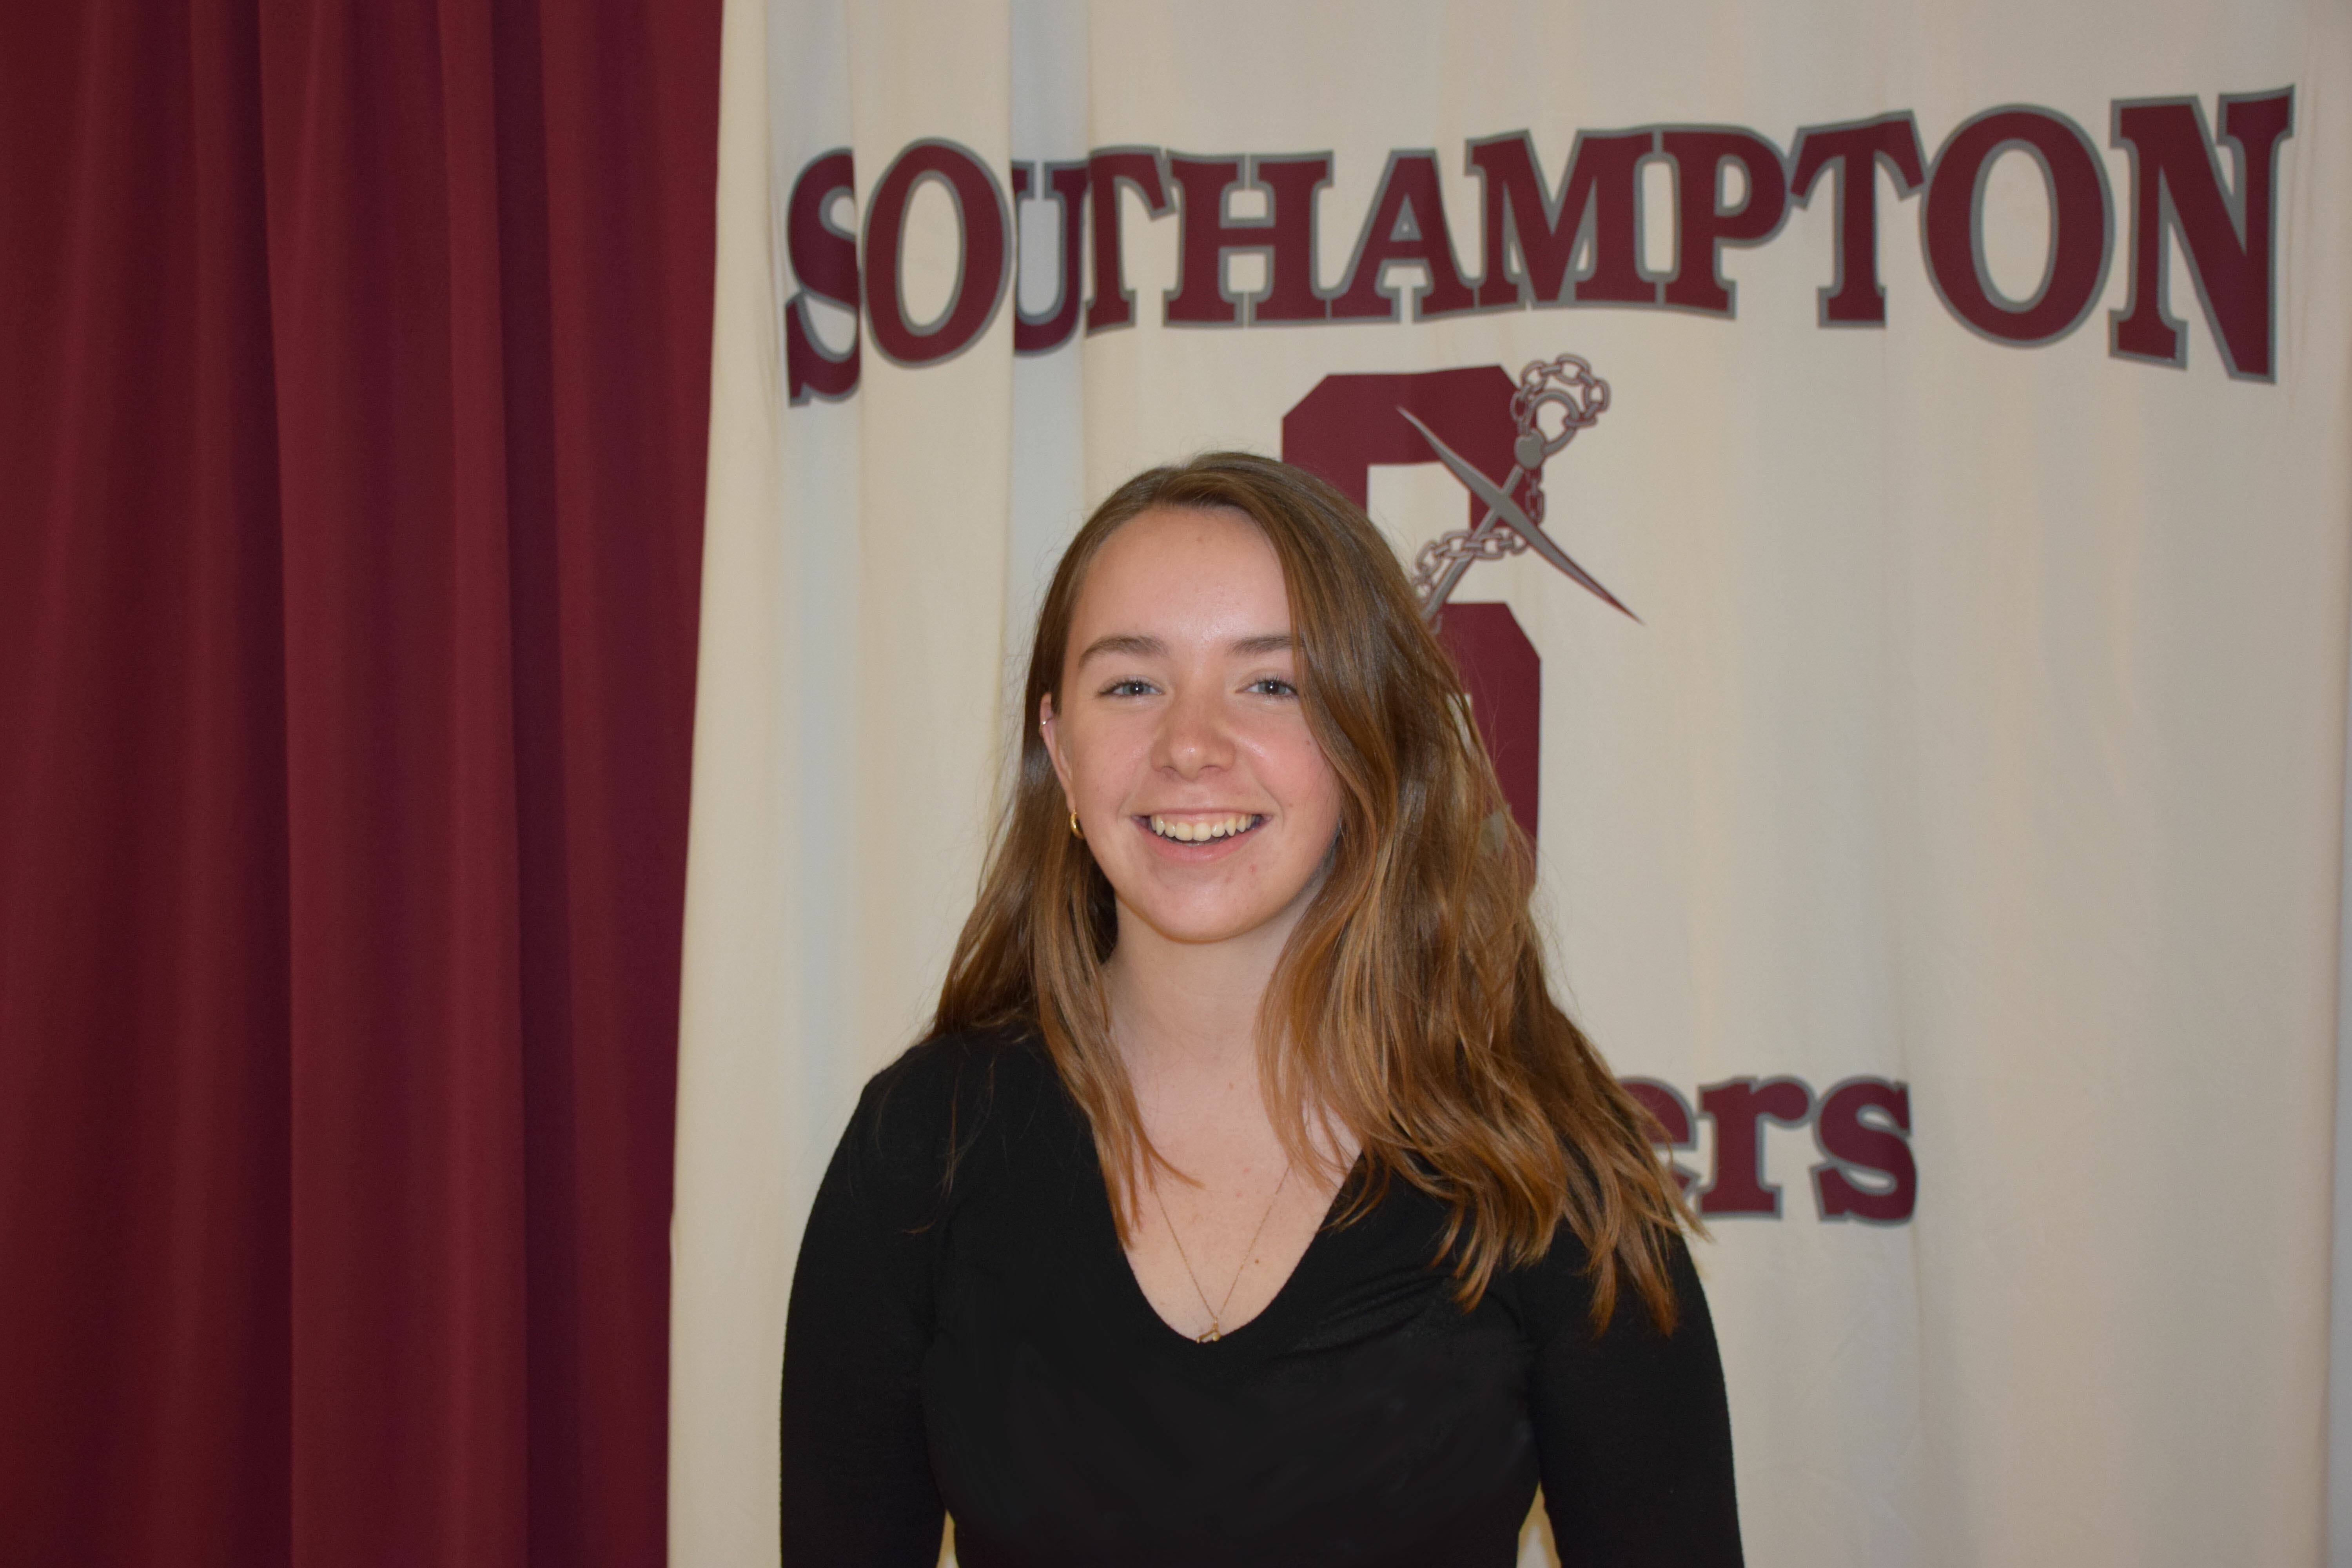 Grace Carter is the Southampton Rotary Student of the Month for November.